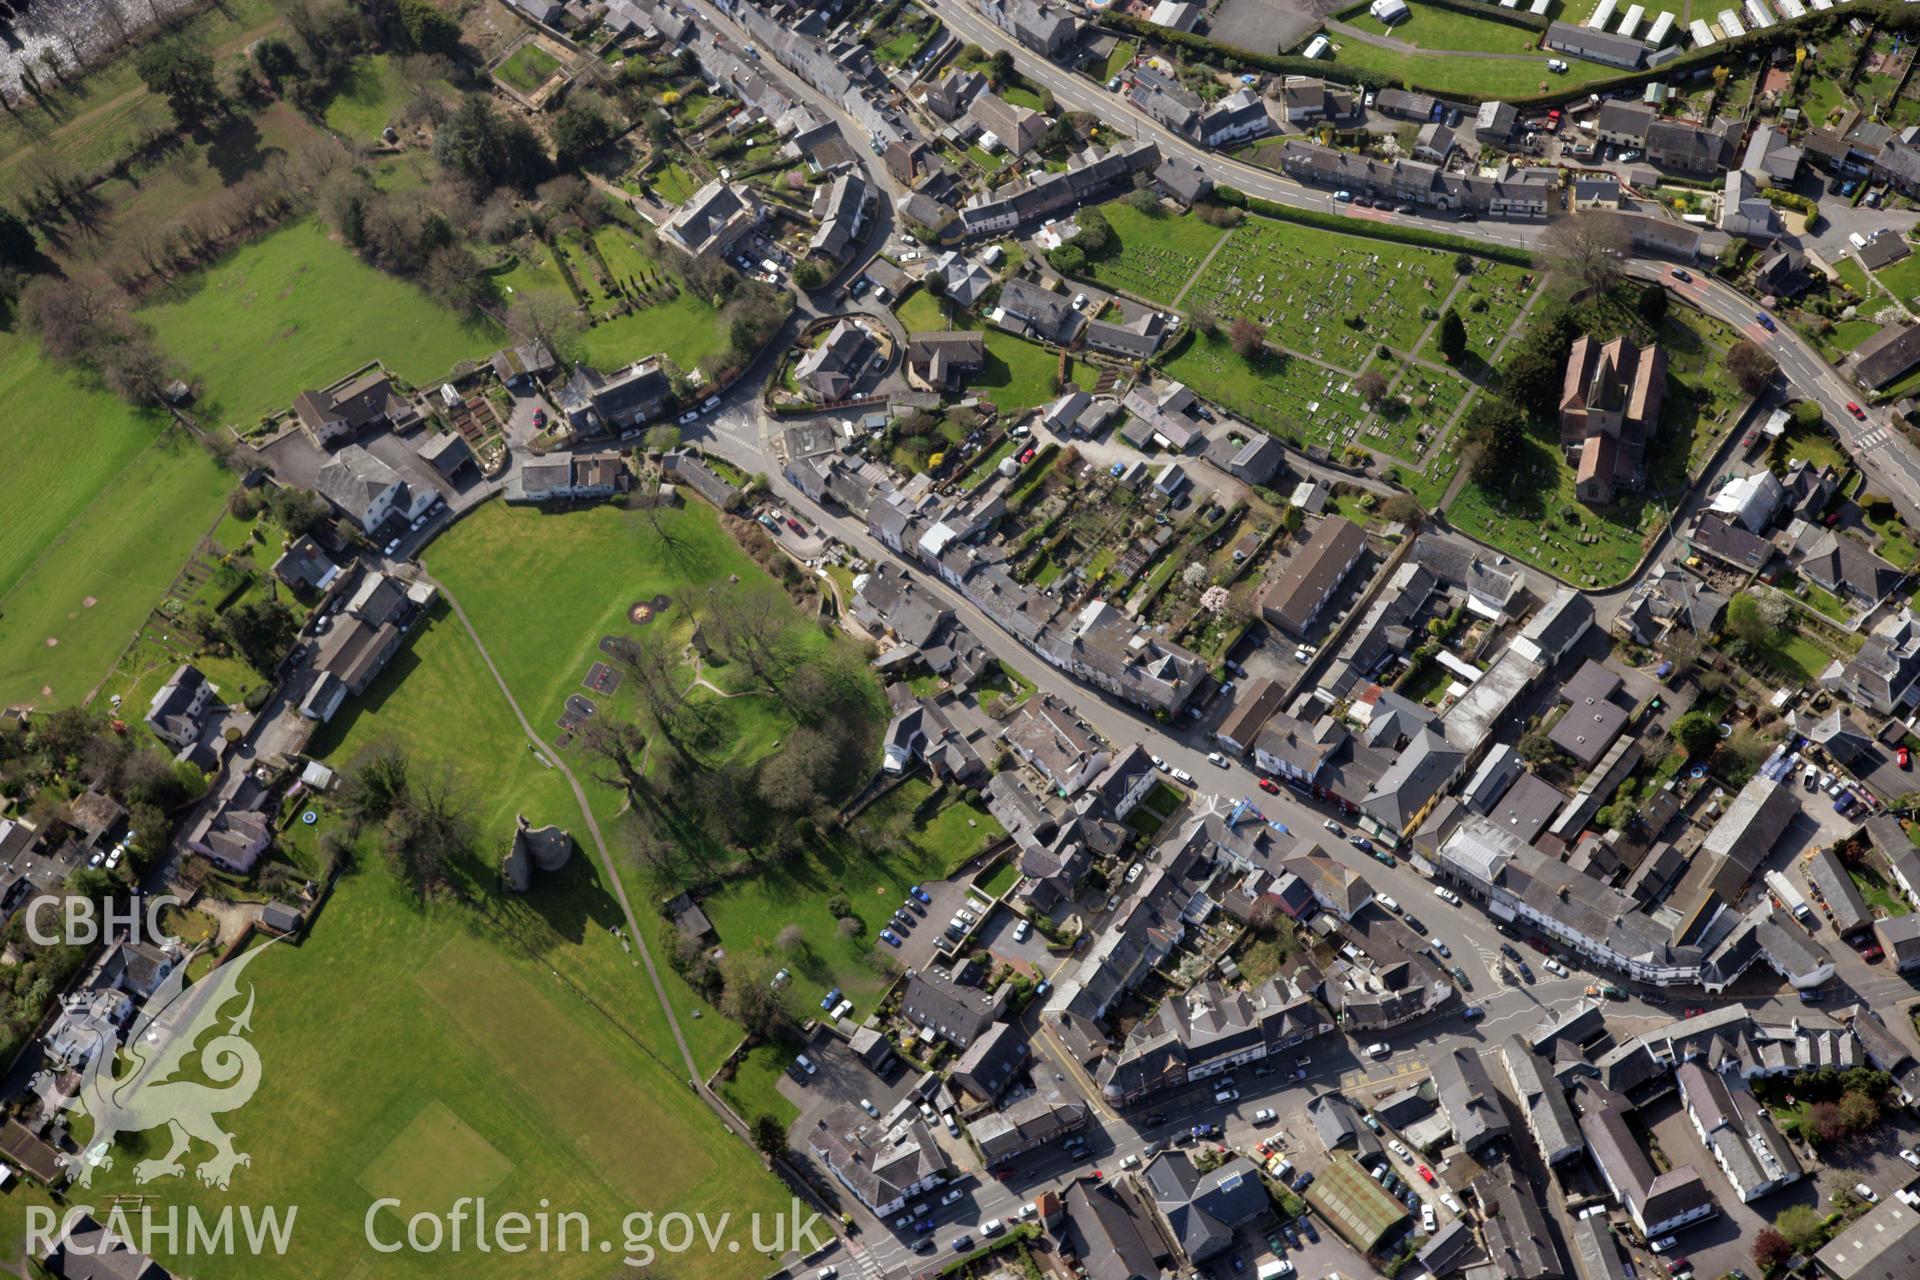 RCAHMW colour oblique photograph of Crickhowell Castle, and town. Taken by Toby Driver and Oliver Davies on 28/03/2012.